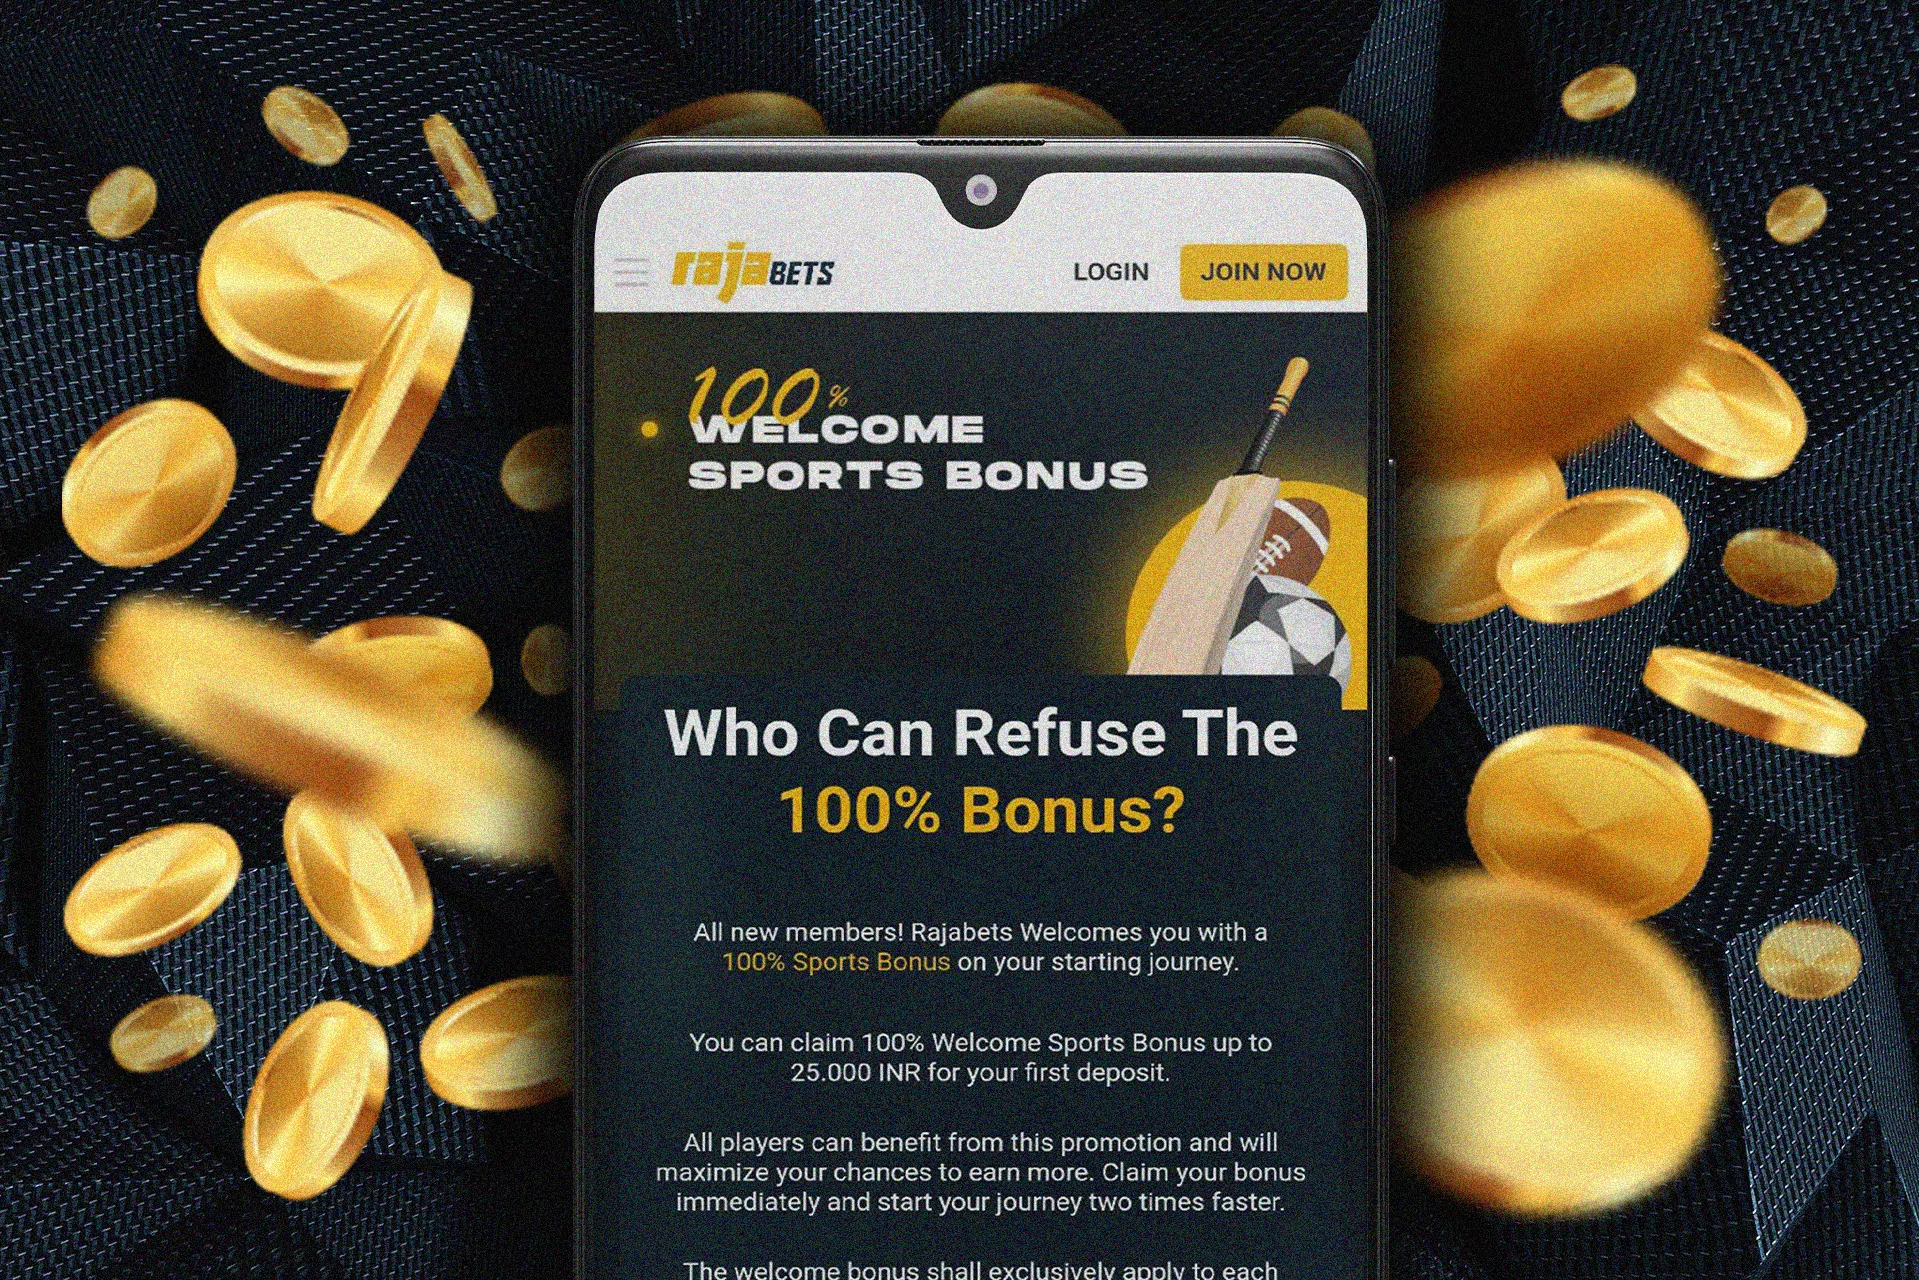 Welcome 100% sports bonus from Rajabets. Who can refuse 100% bonus?